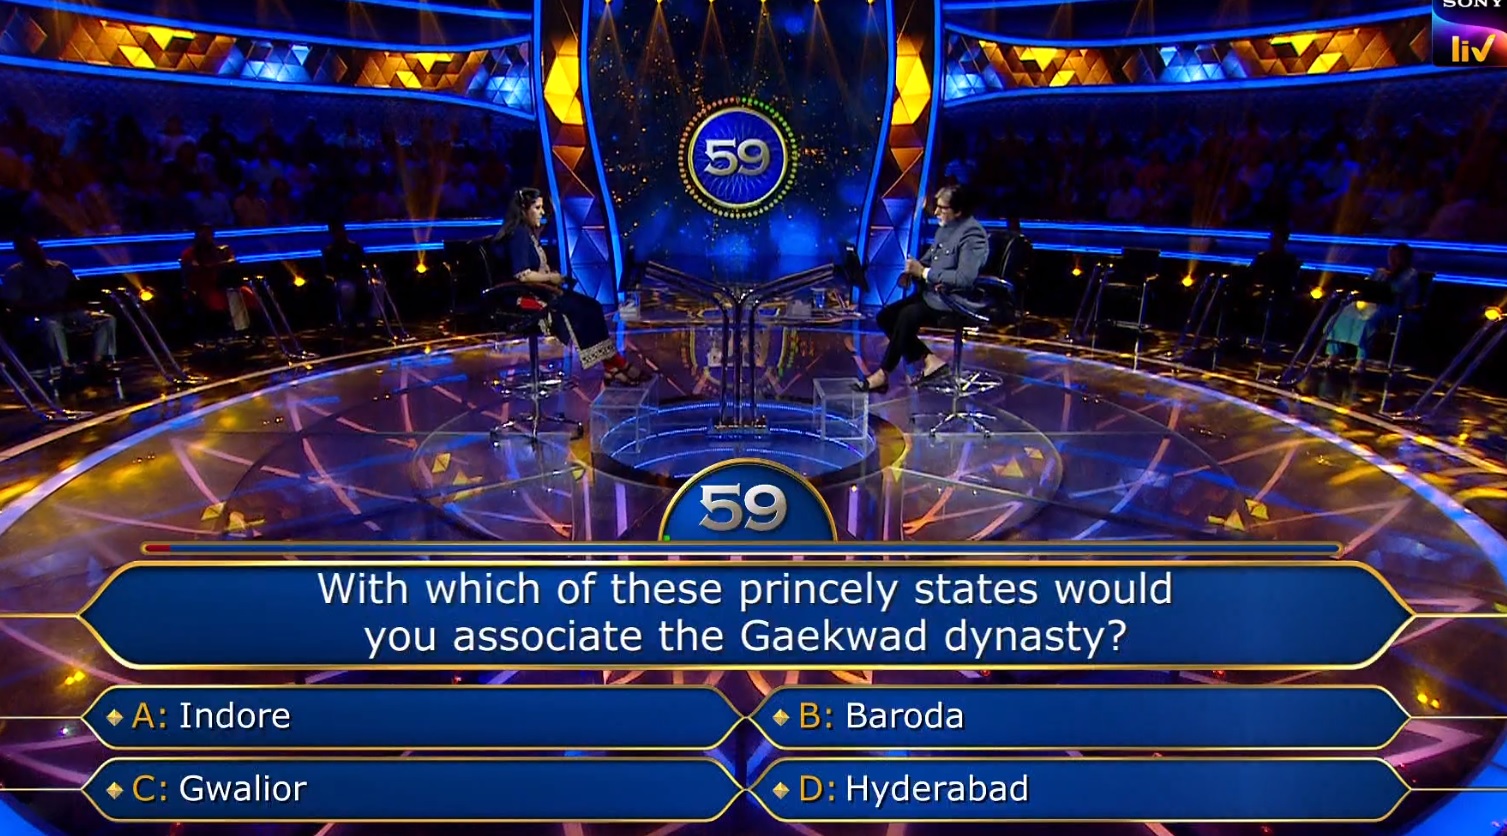 Ques : With which of these princely states would you associate the Gaekwad dynasty?